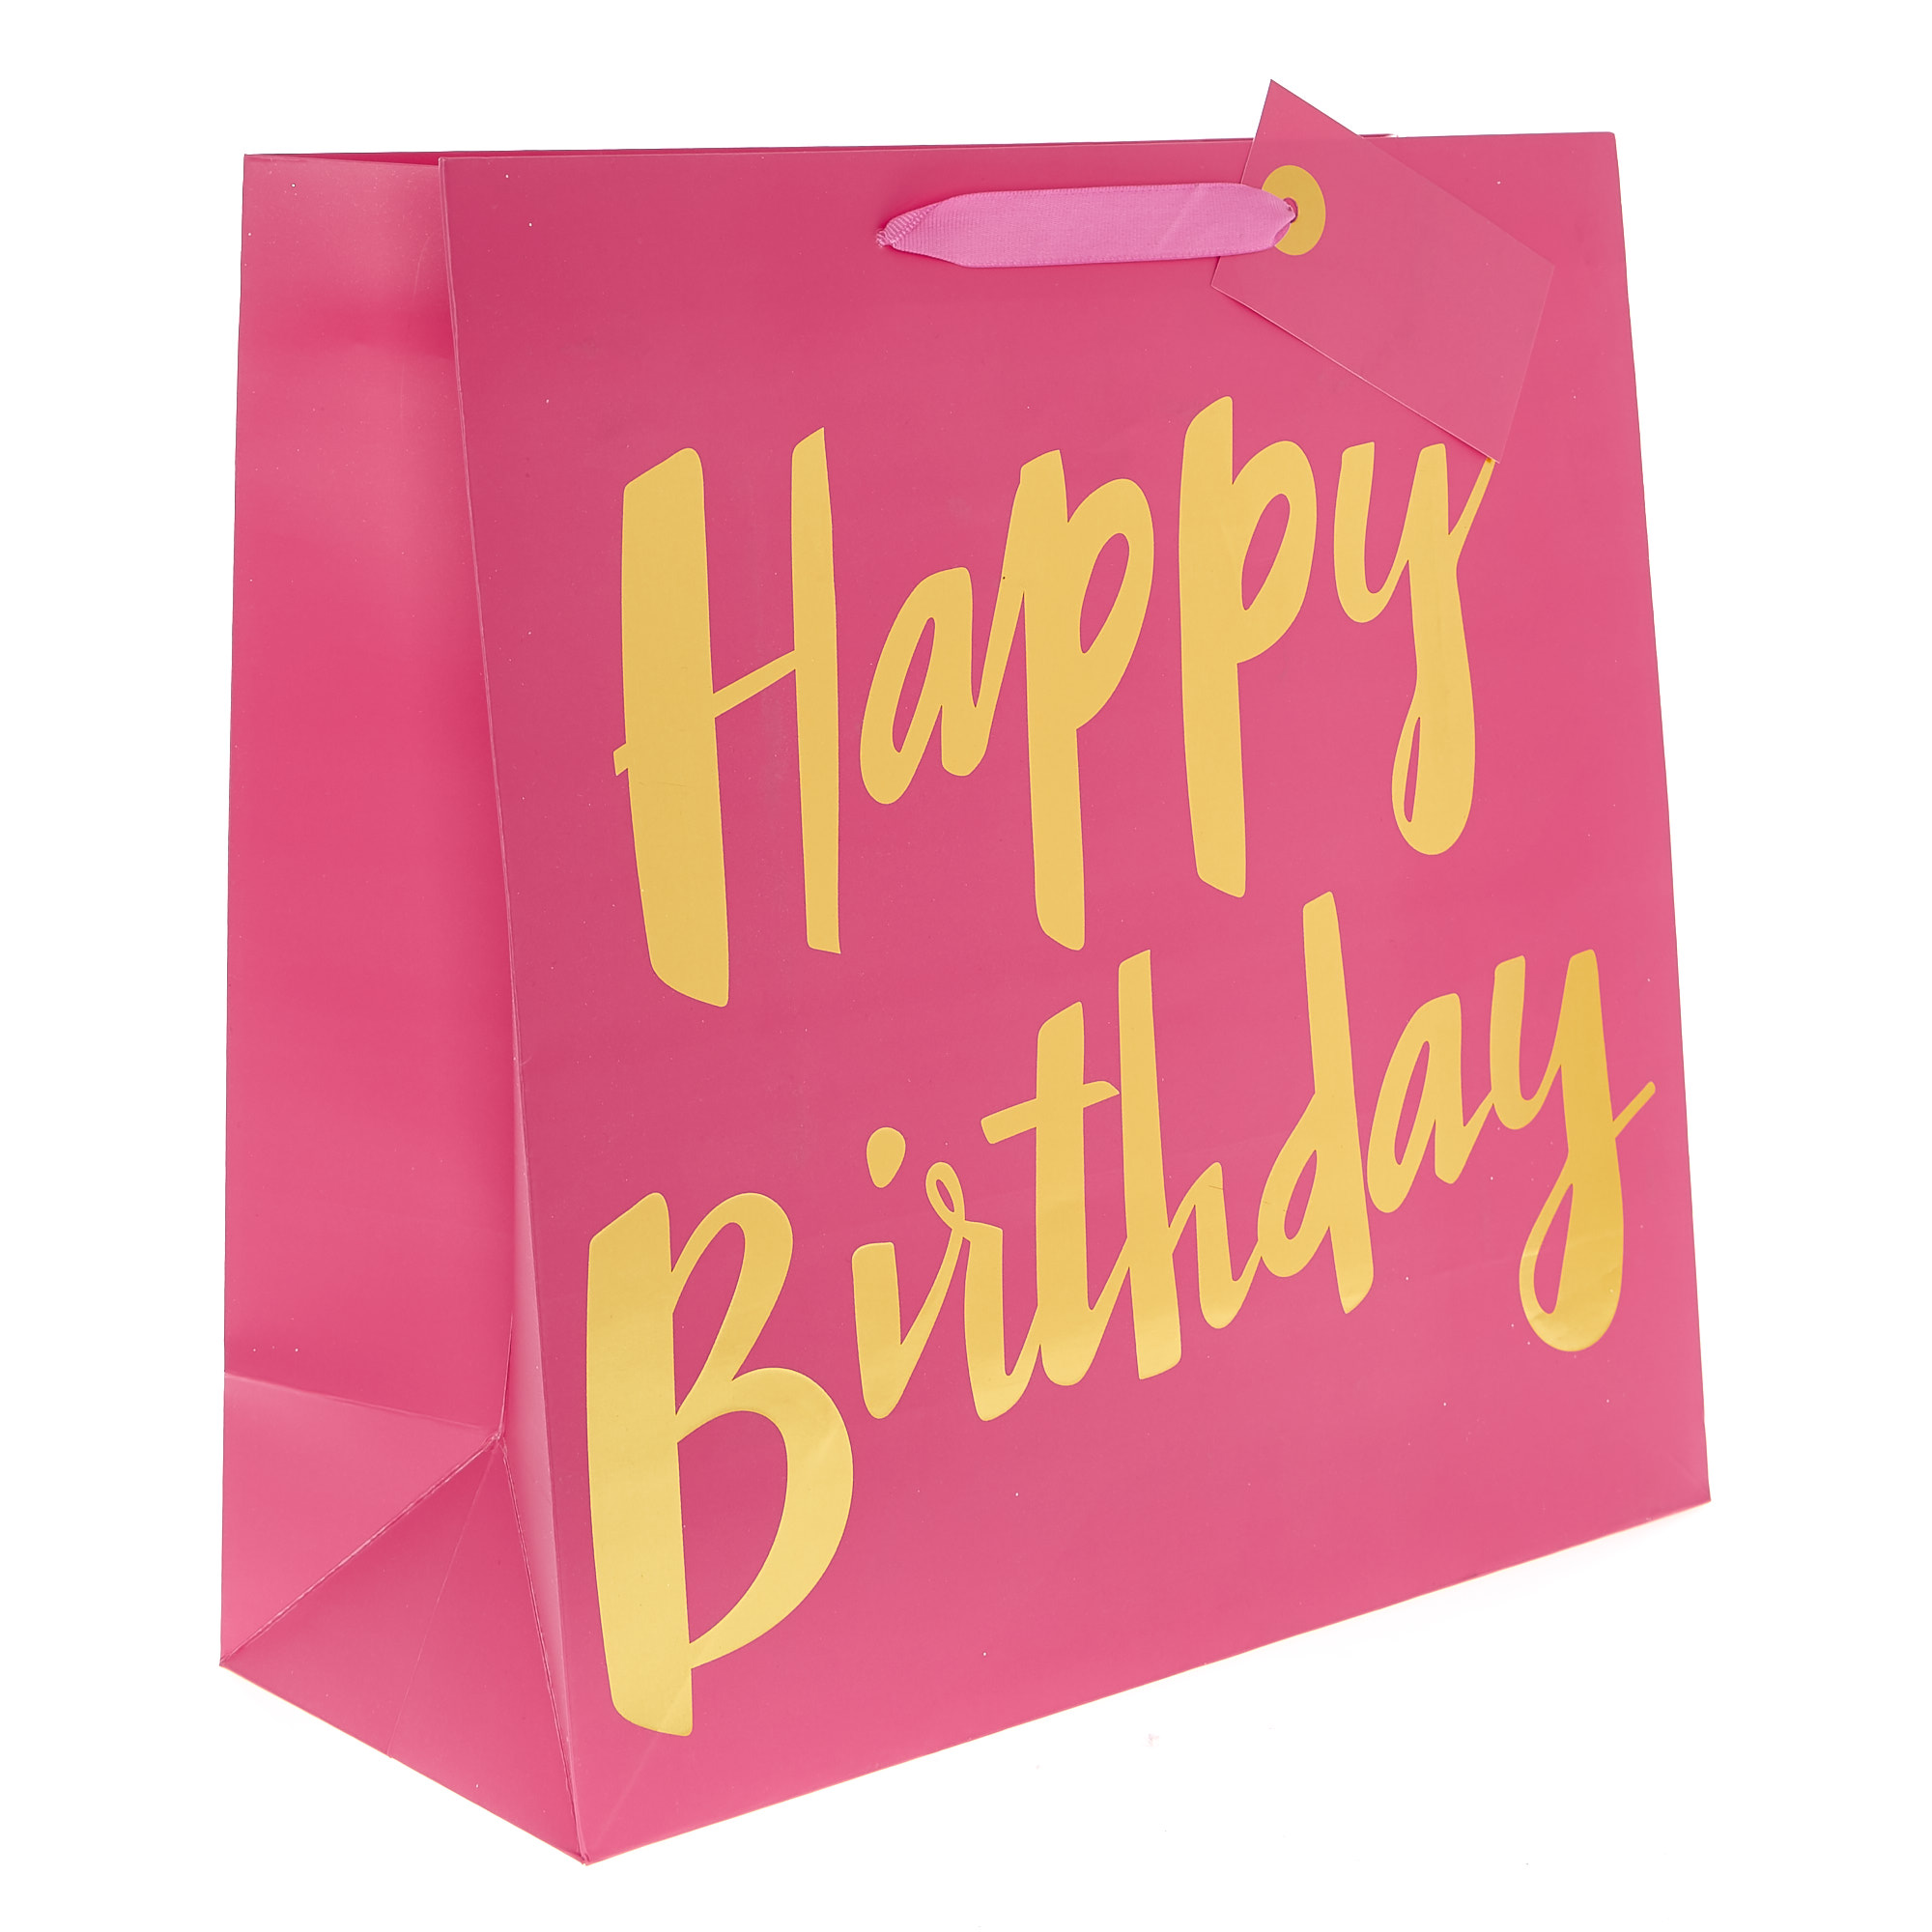 Large Square Gift Bag - Happy Birthday Pink